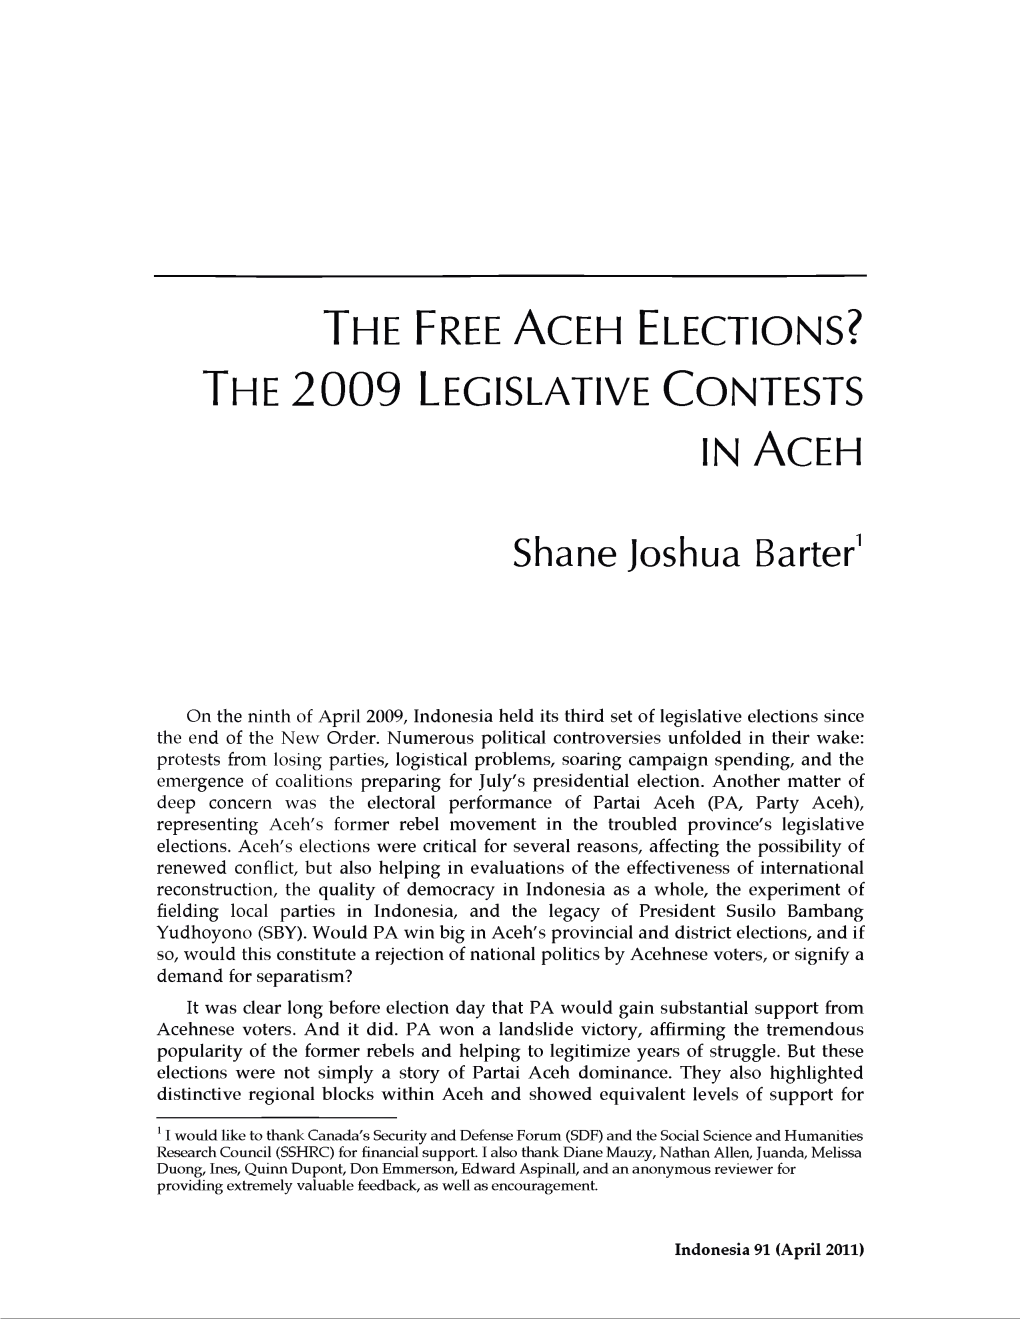 The Free Aceh Elections? the 2009 Legislative Contests in Aceh